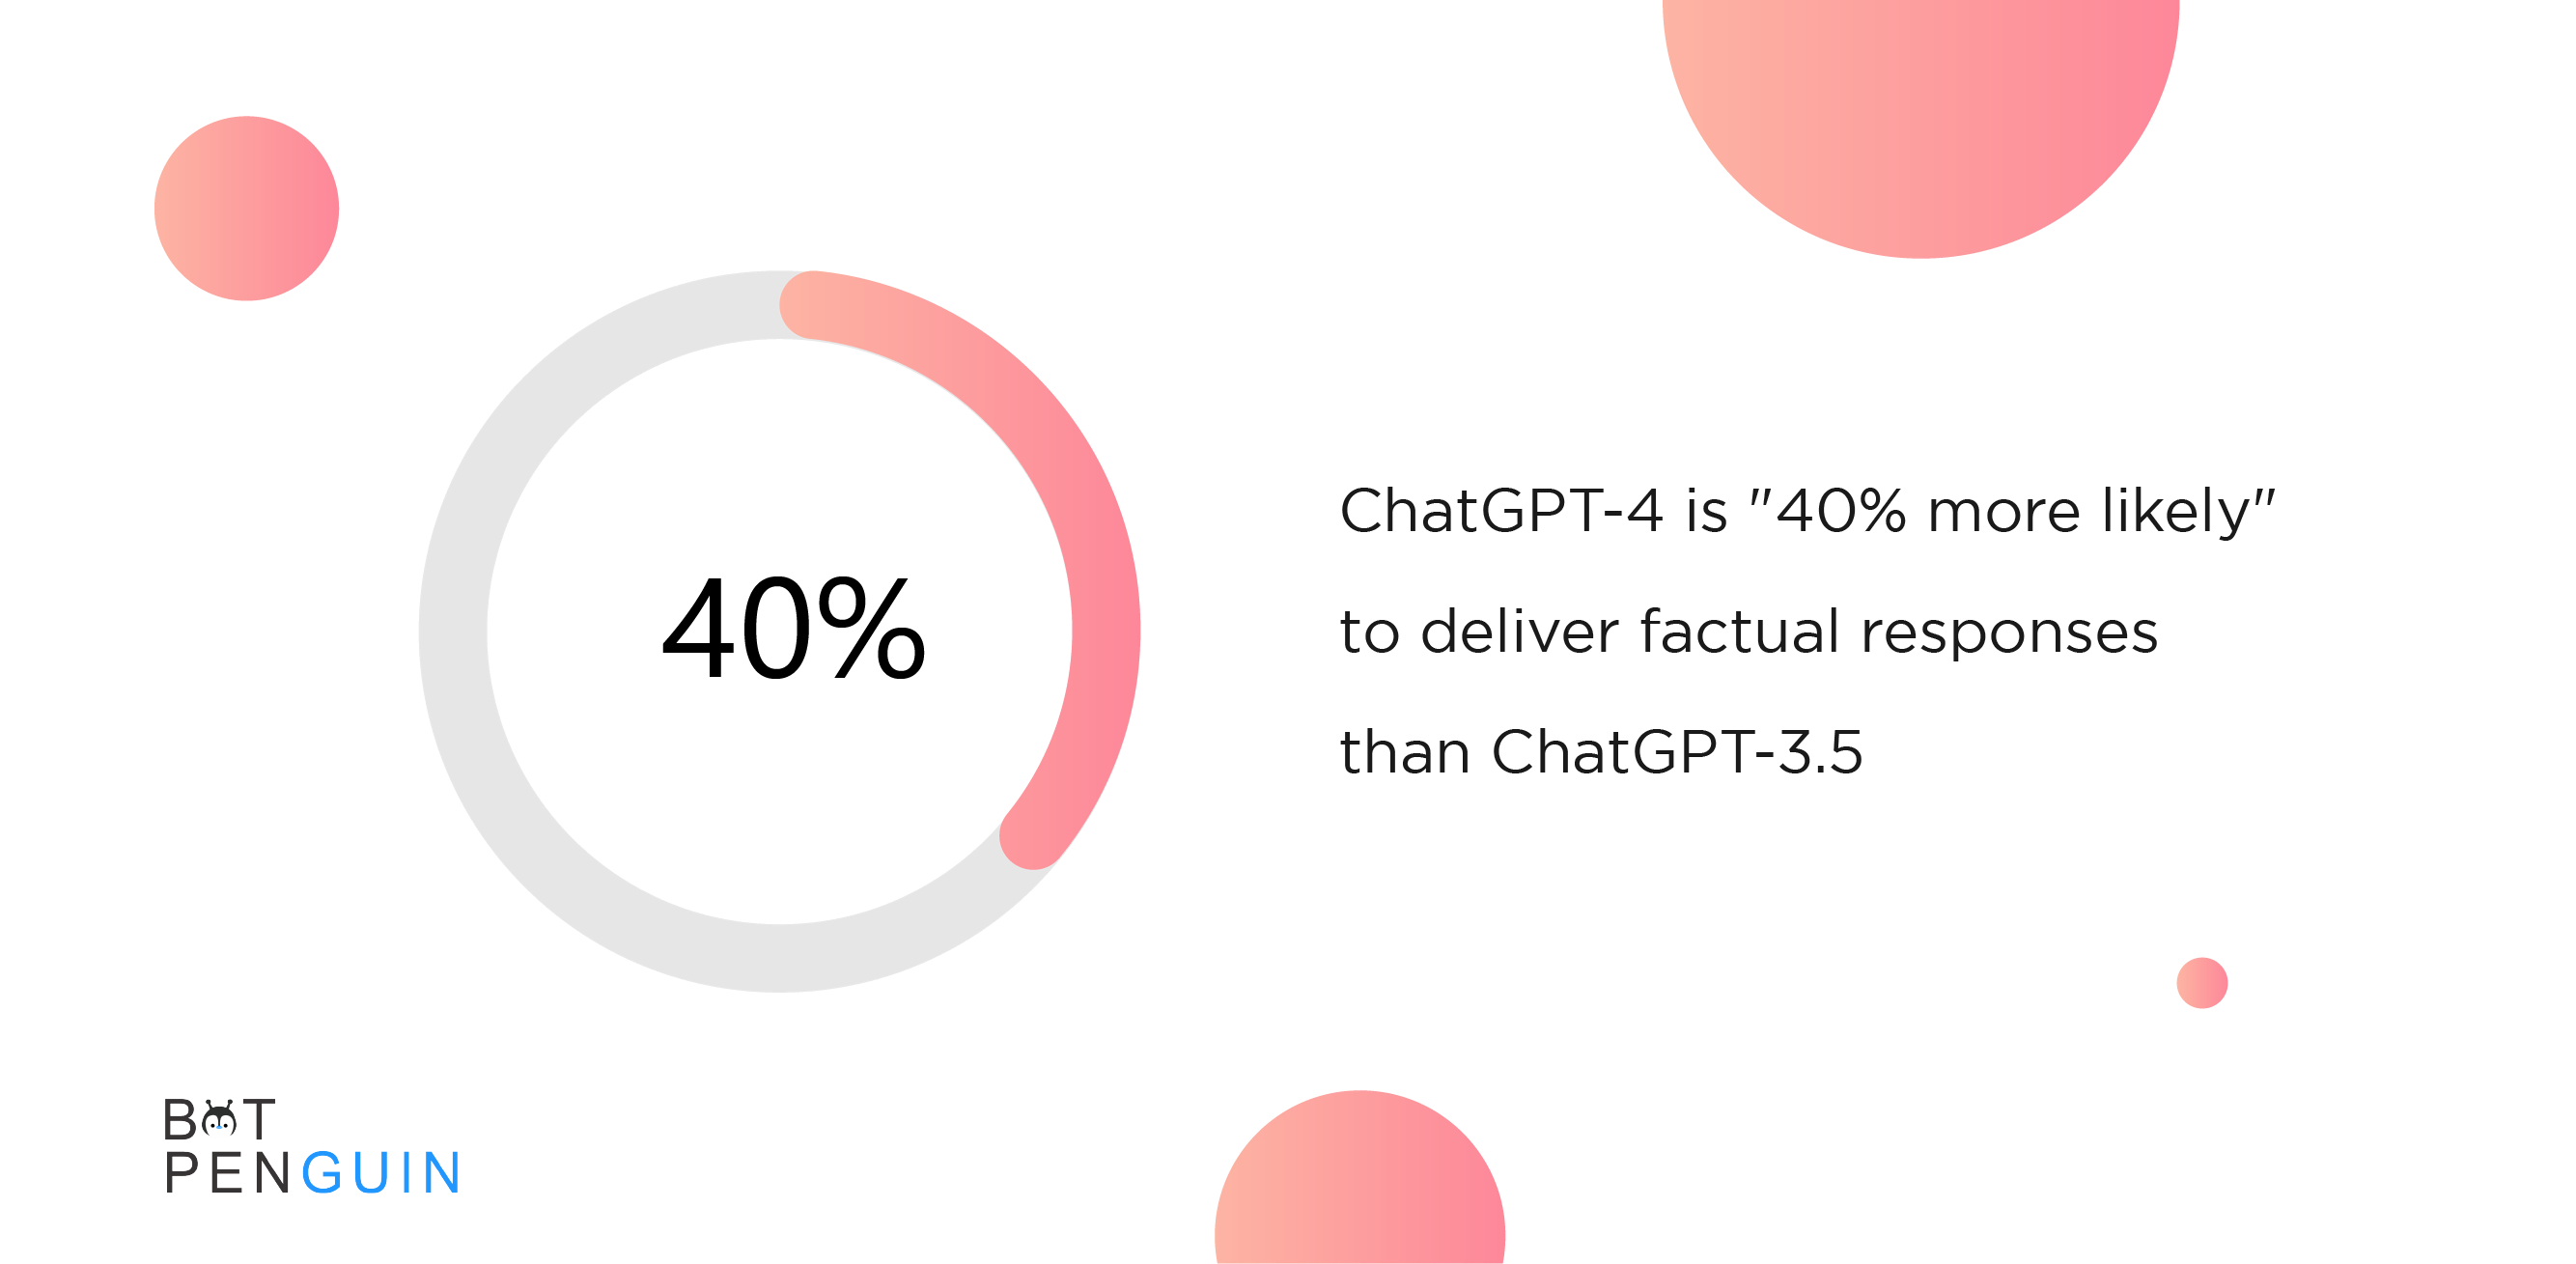 What distinguishes ChatGPT-4 from ChatGPT?